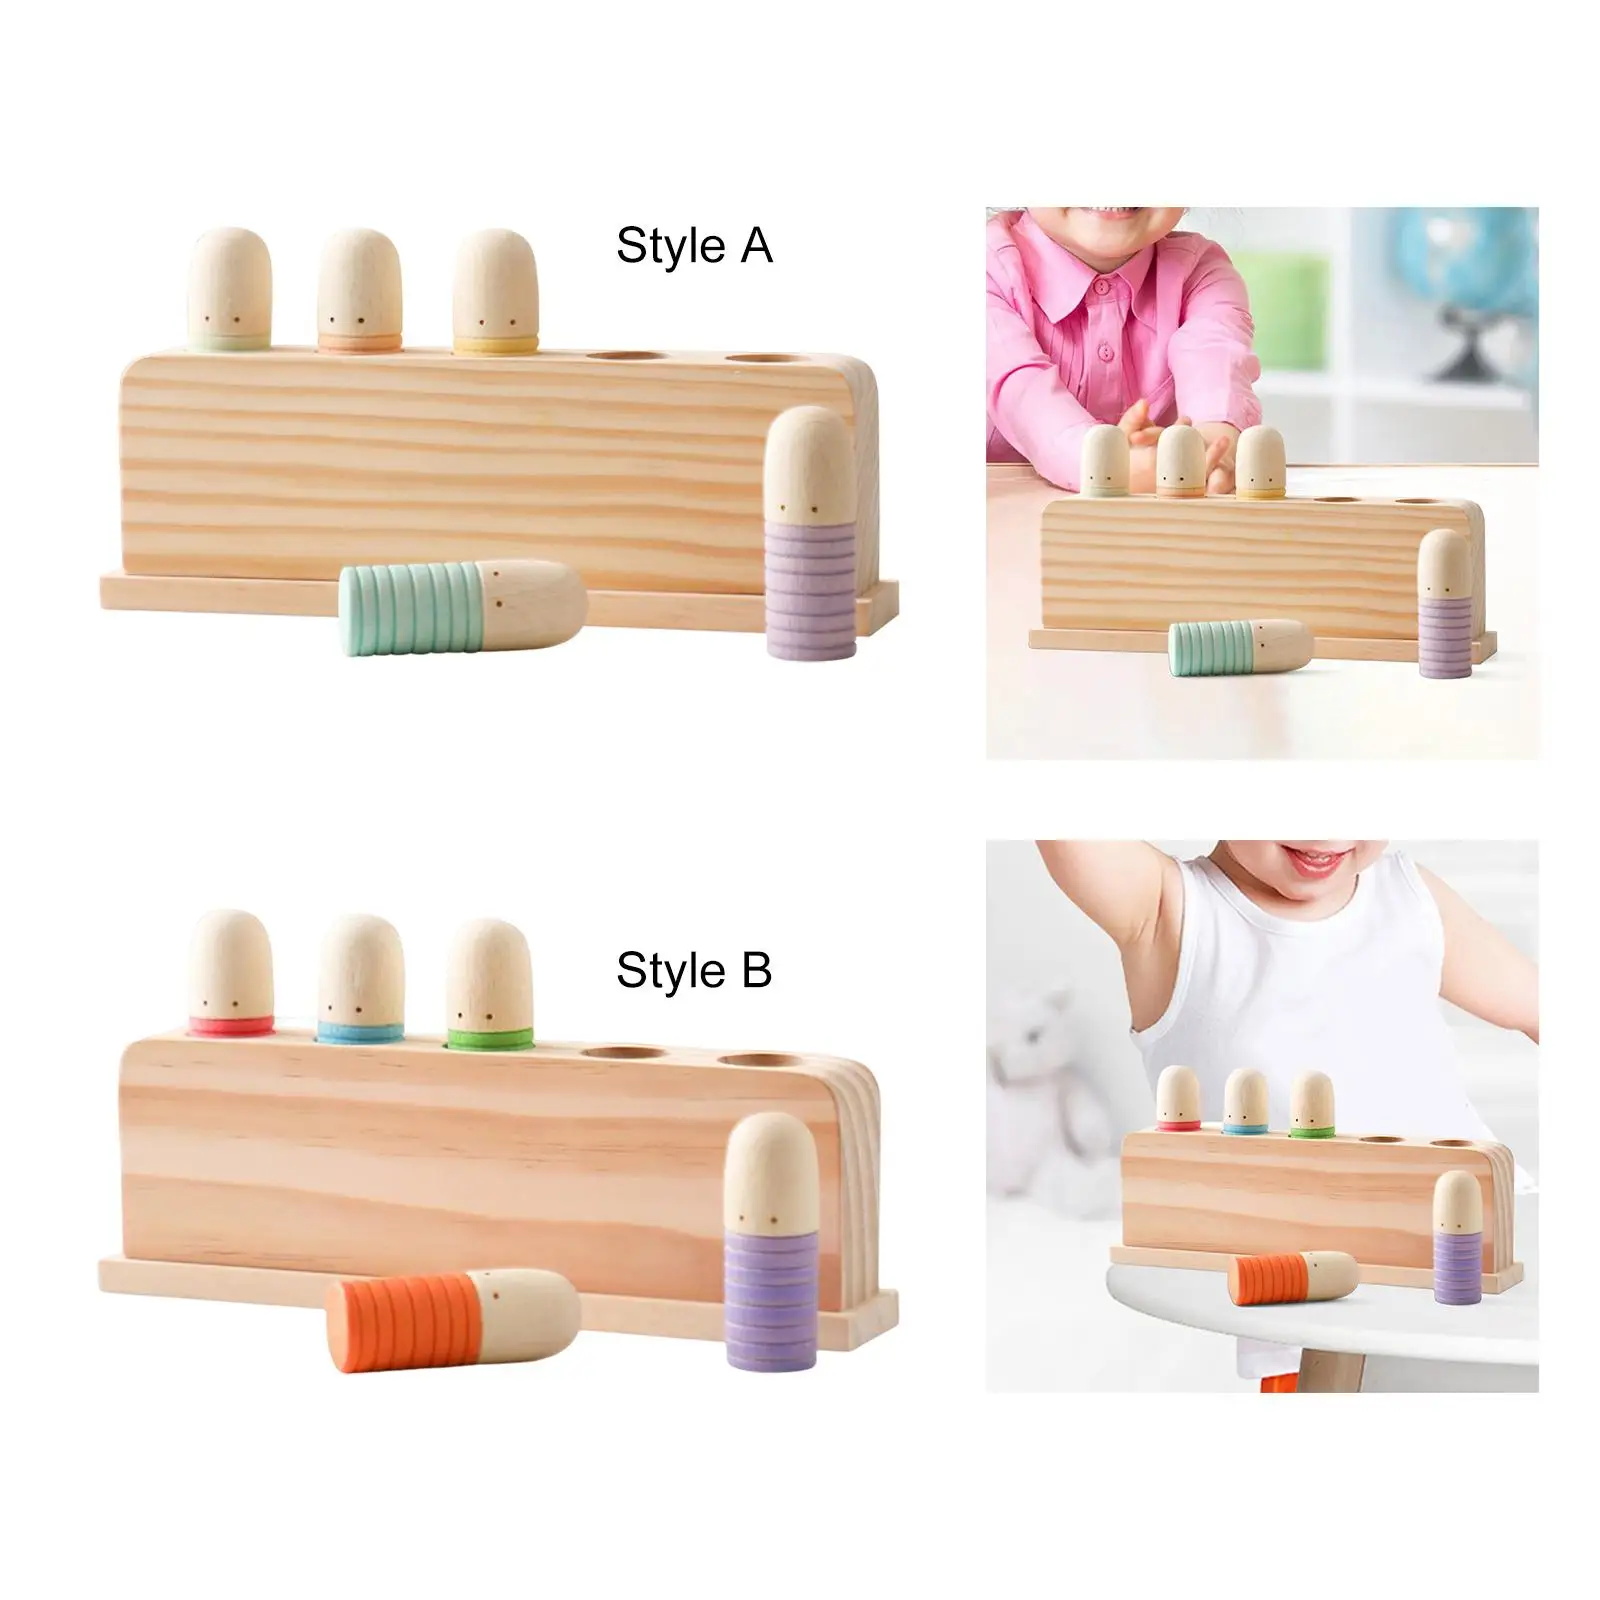 Wooden Peg People Wood Figures Shape Preschool Learning Educational Toys Montessori Toys for Toddlers